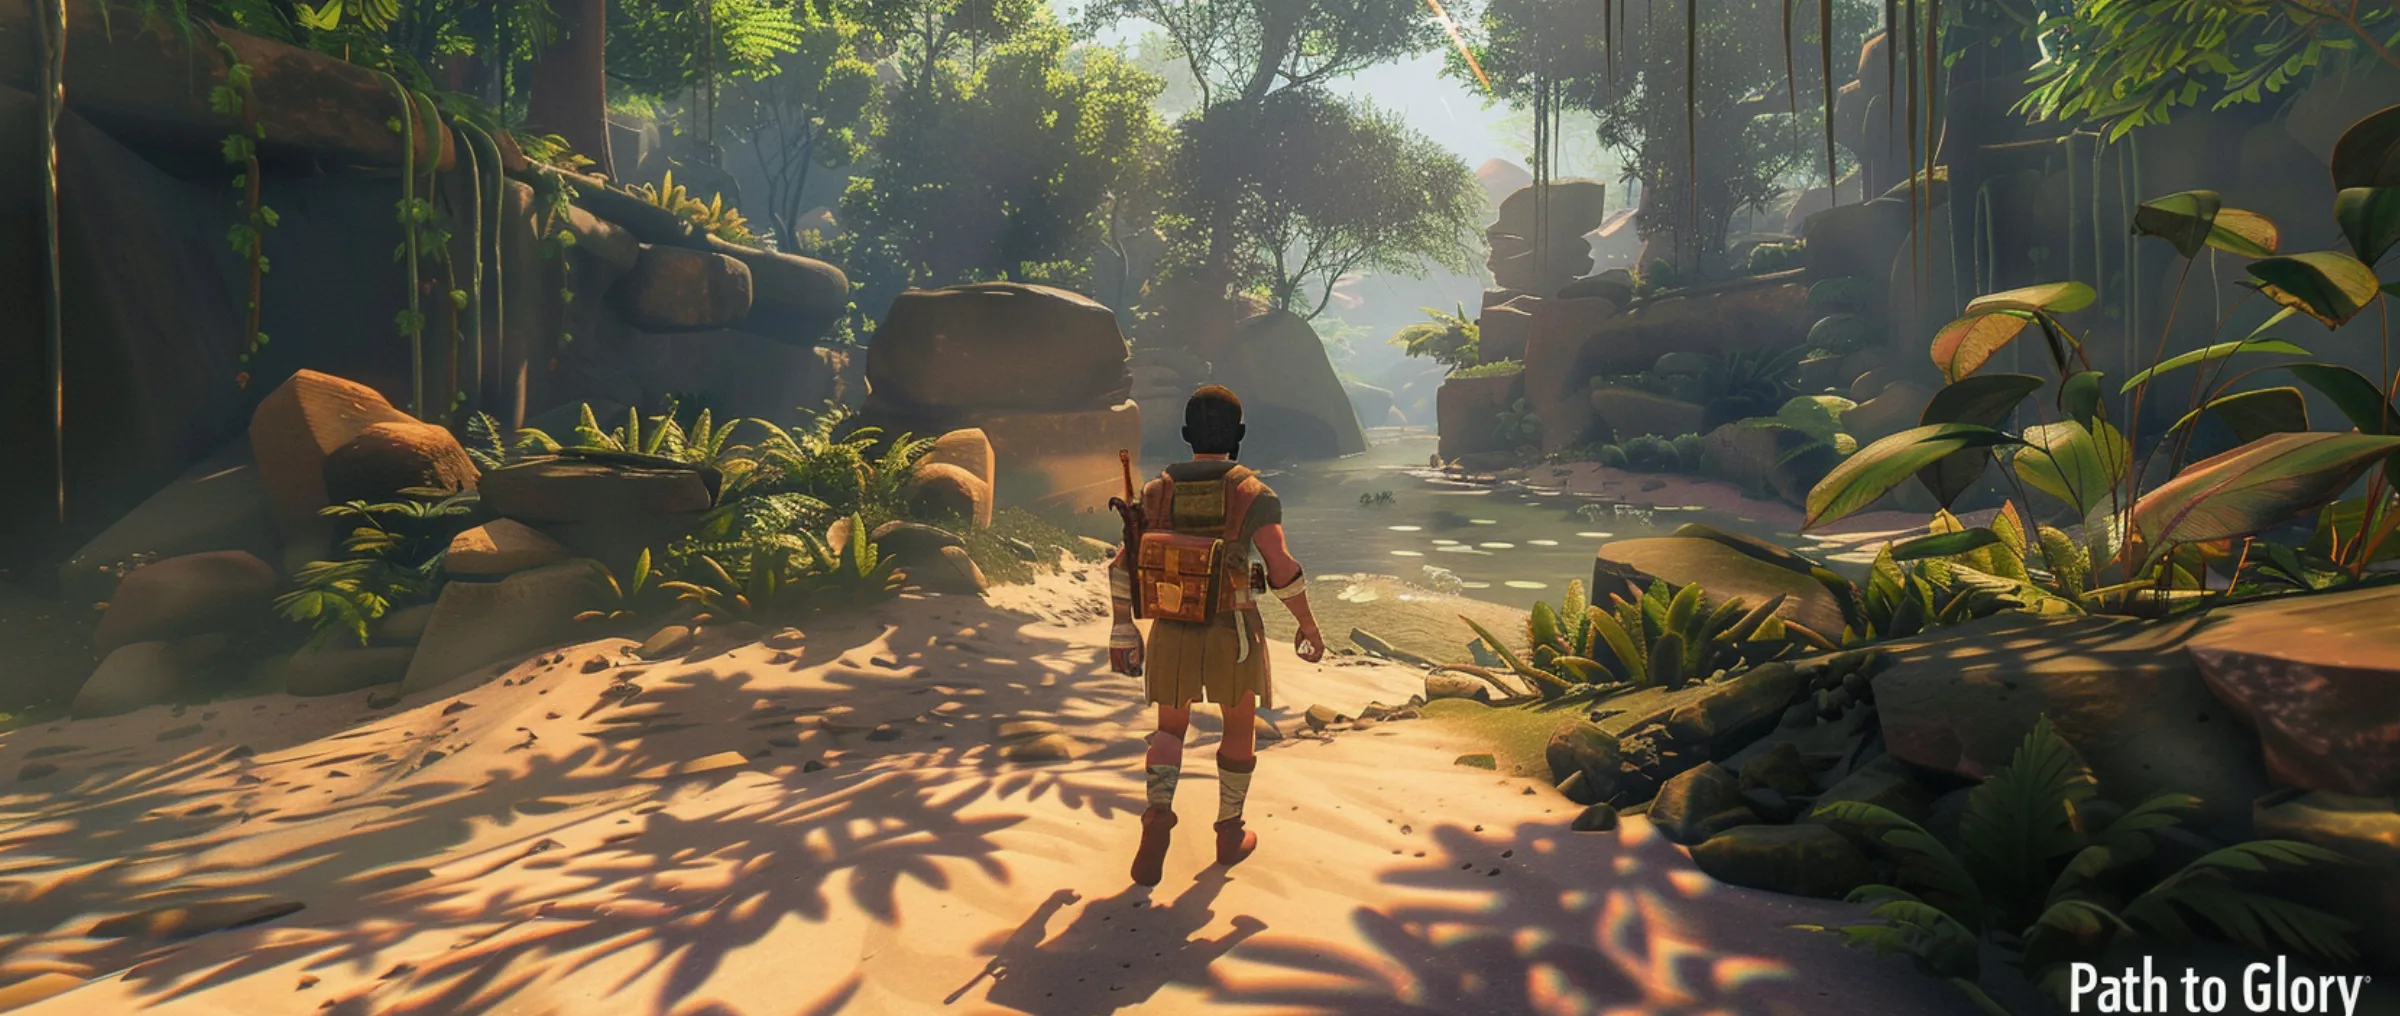 The Sandbox launches the virtual adventure Path to Glory